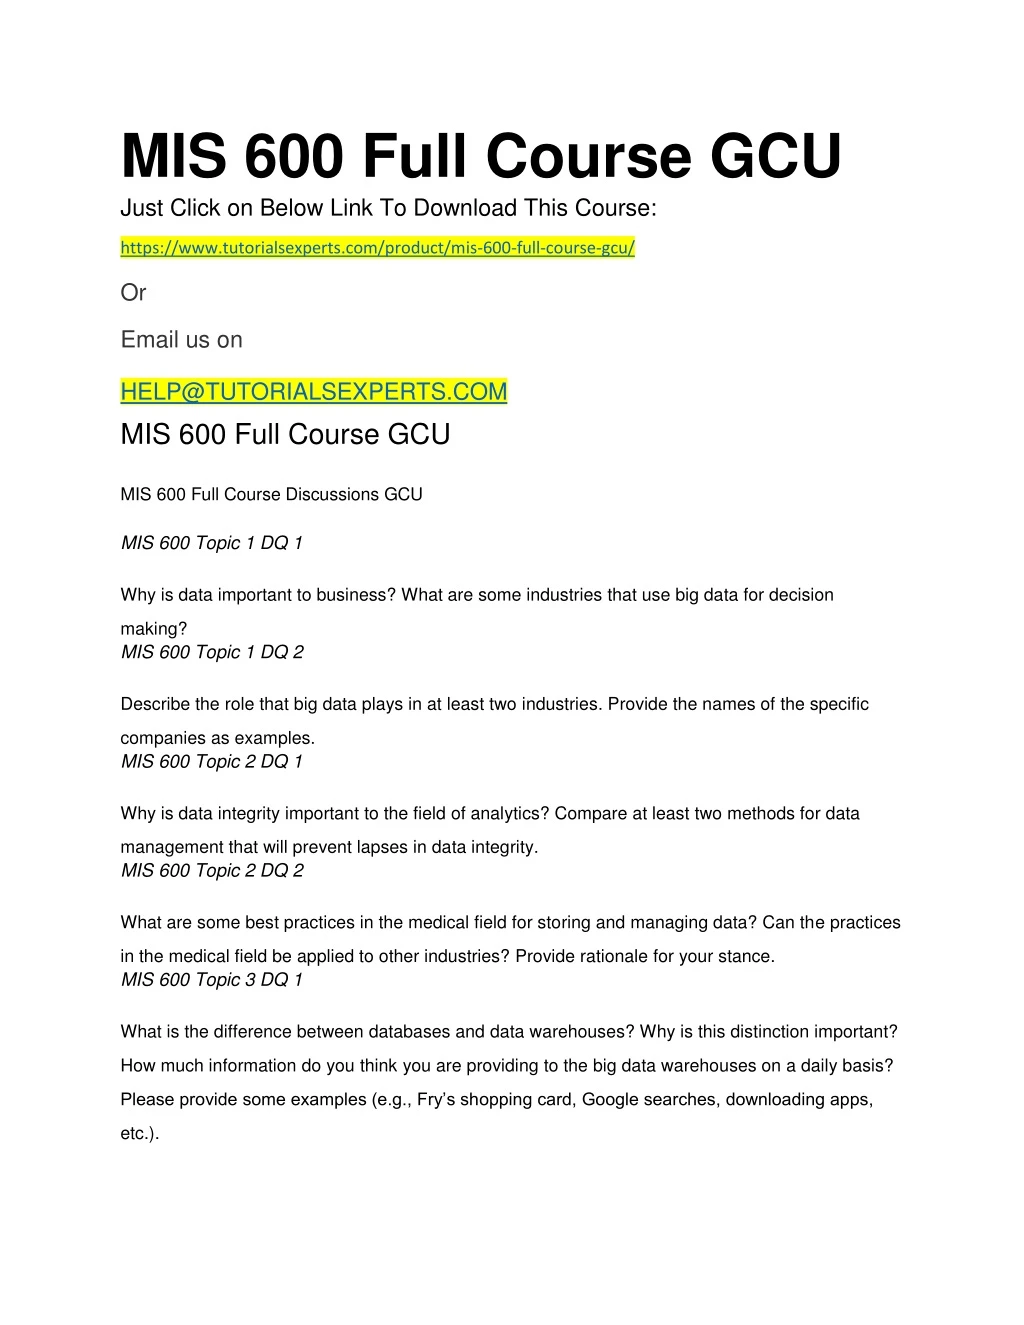 mis 600 full course gcu just click on below link